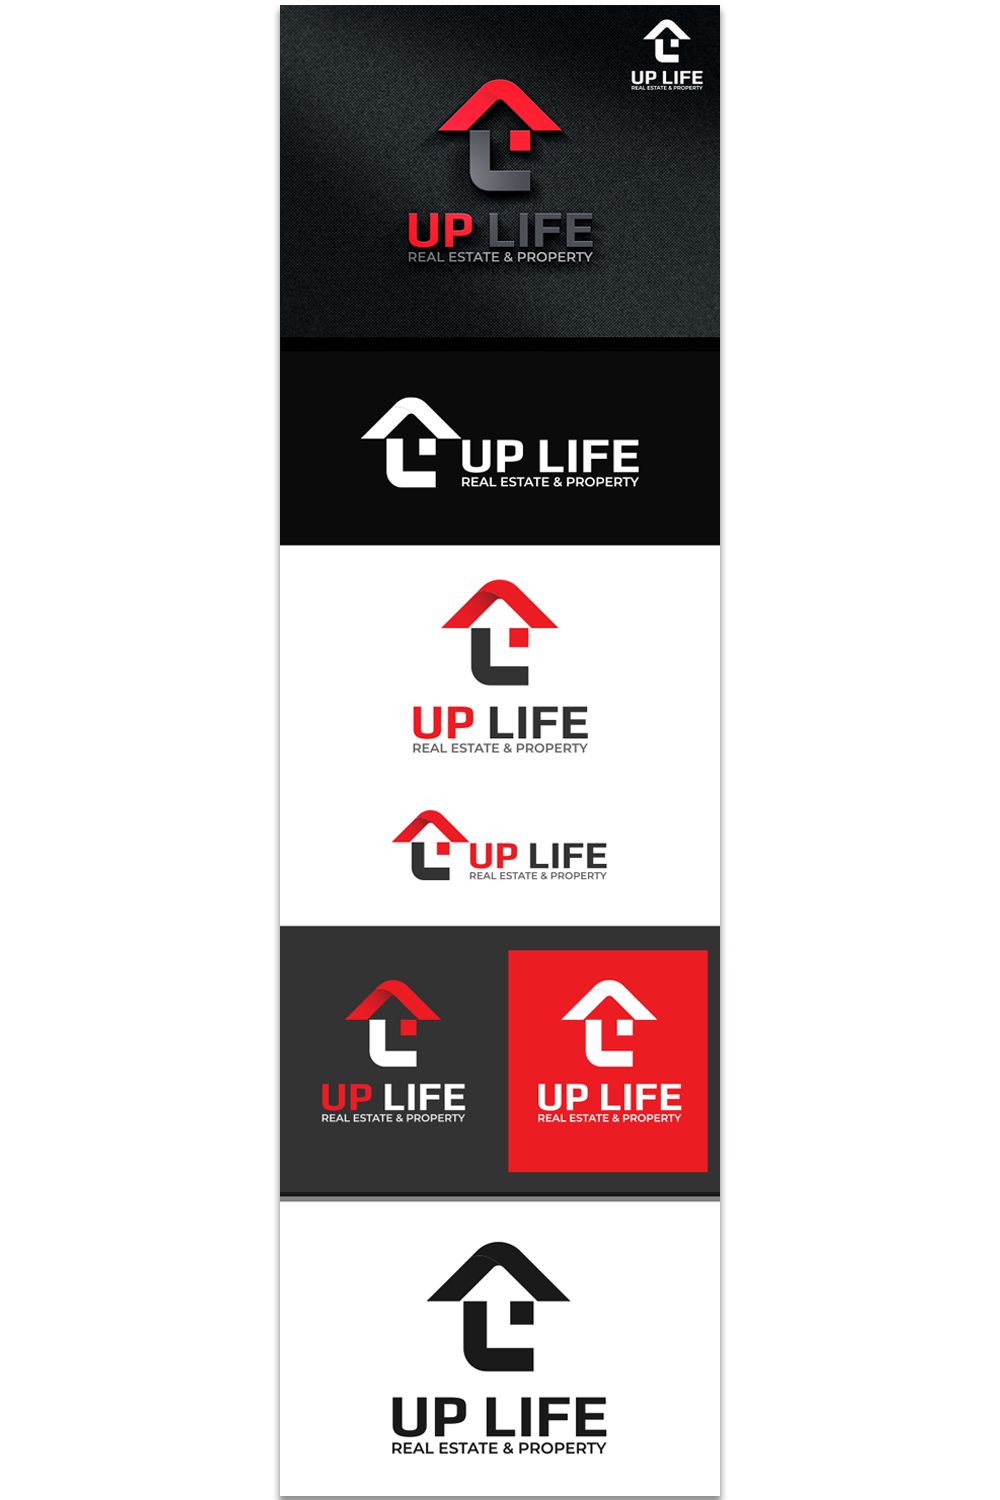 Real Estate Company Logo - pinterest image preview.